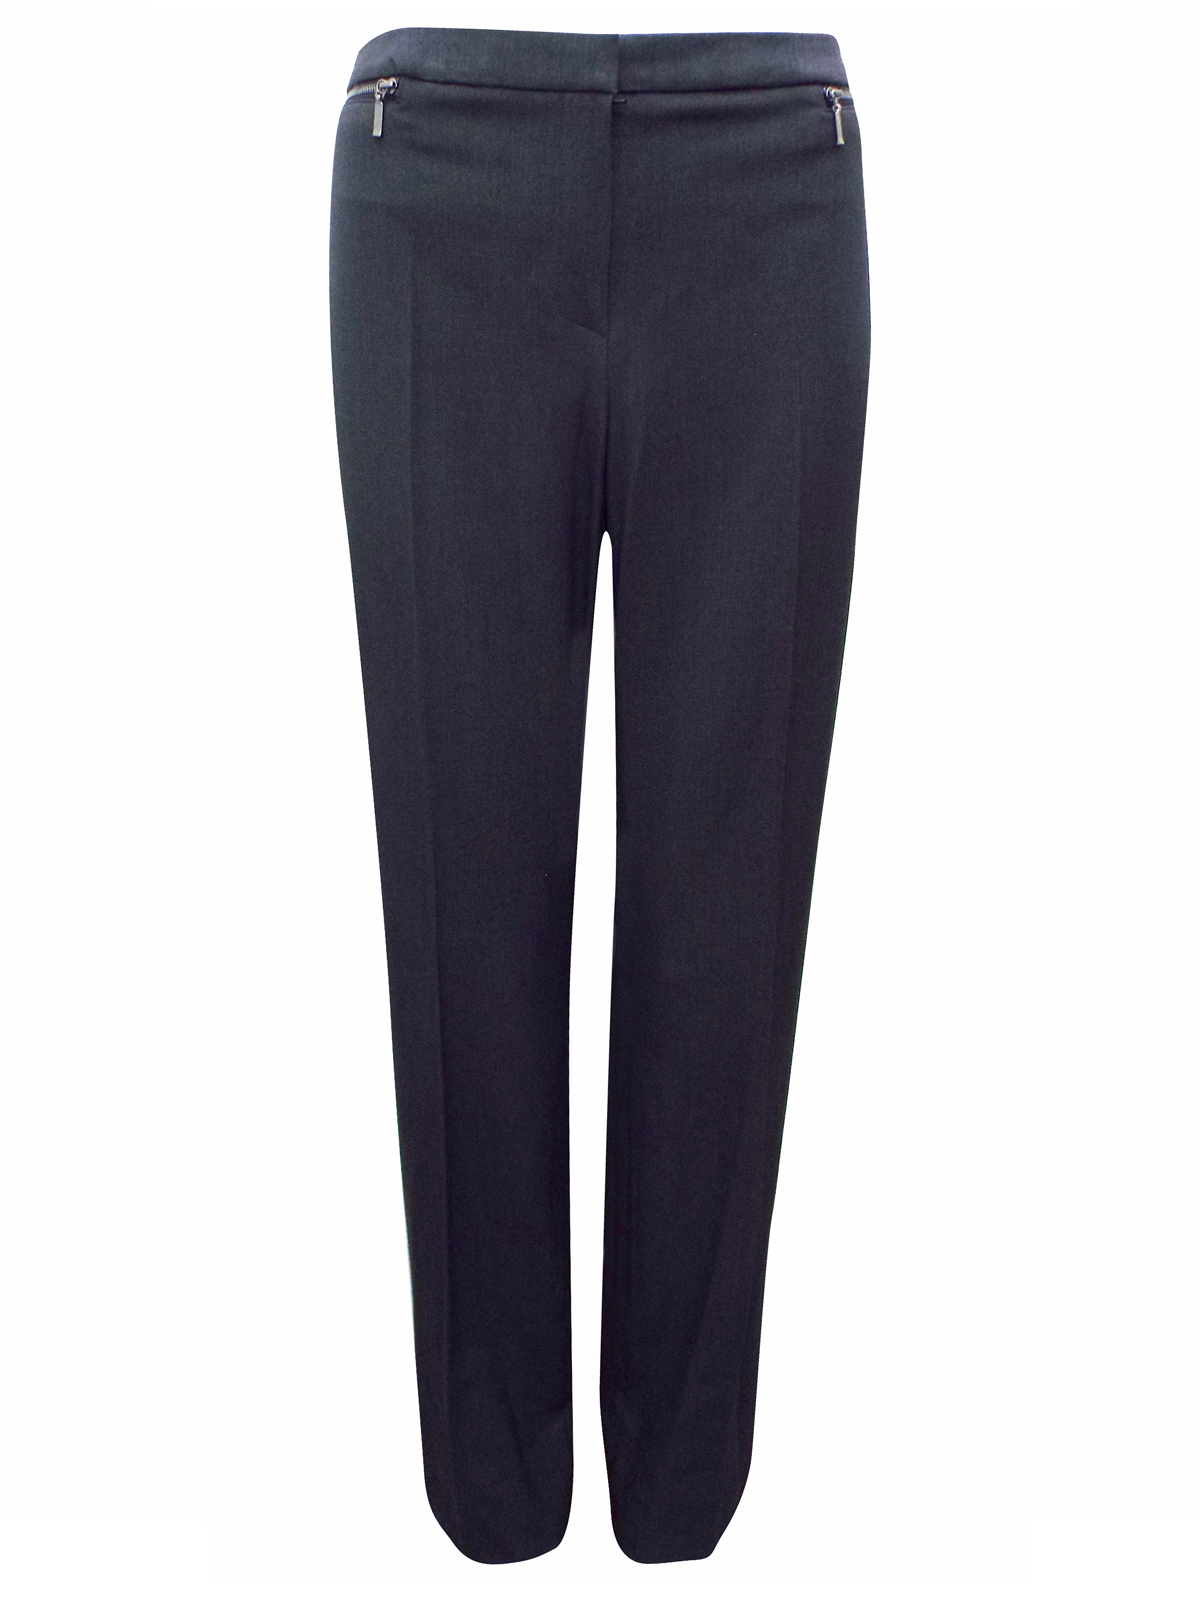 Marks and Spencer - - M&5 CHARCOAL Straight Leg Zip Pocket Trousers ...